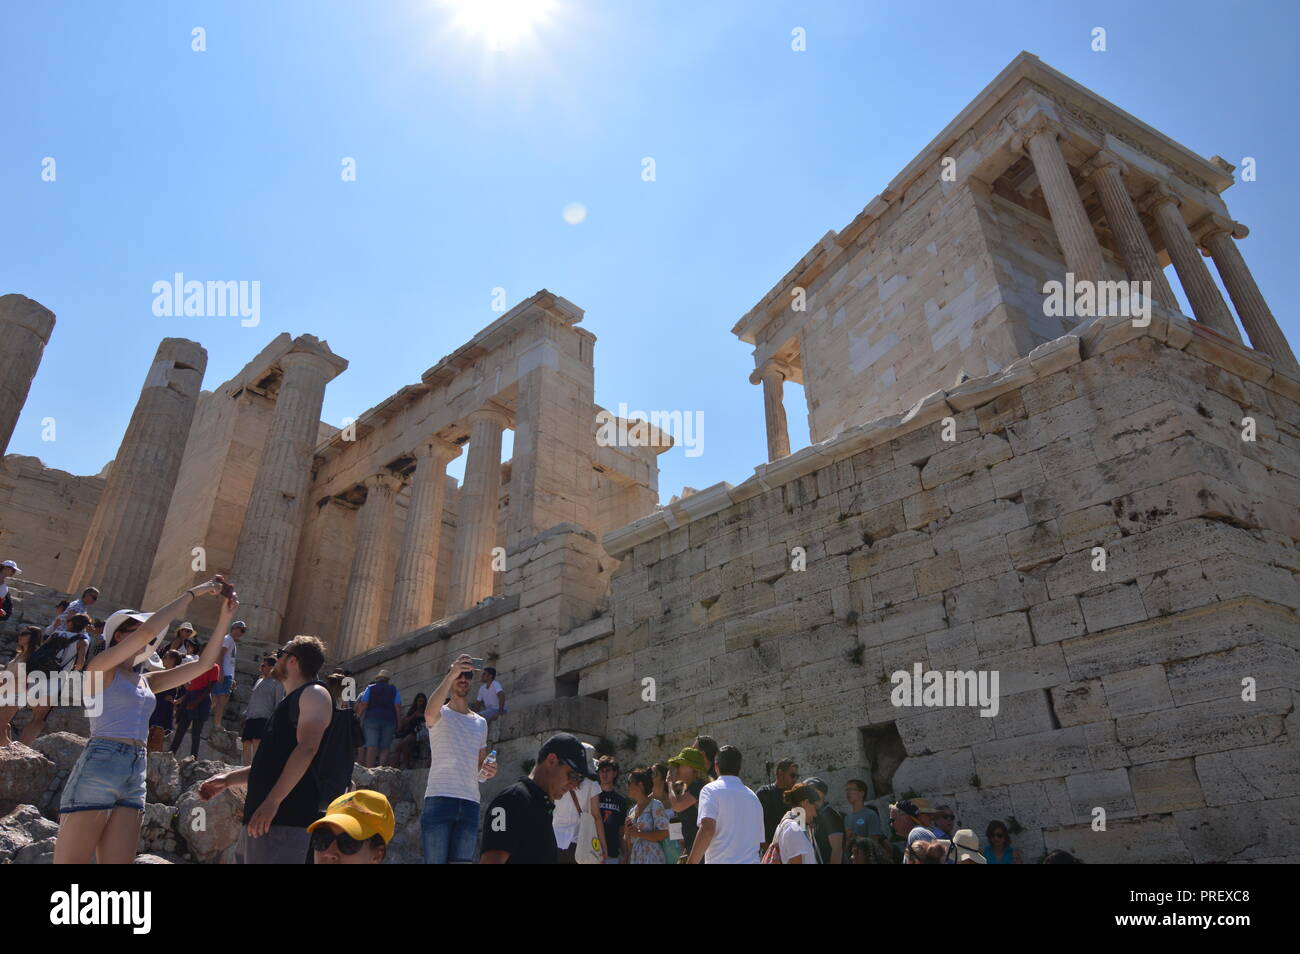 Propylaea of the Acropolis of Athens. Architecture, History, Travel, Landscapes. July 9, 2018. Athens Greece. Stock Photo